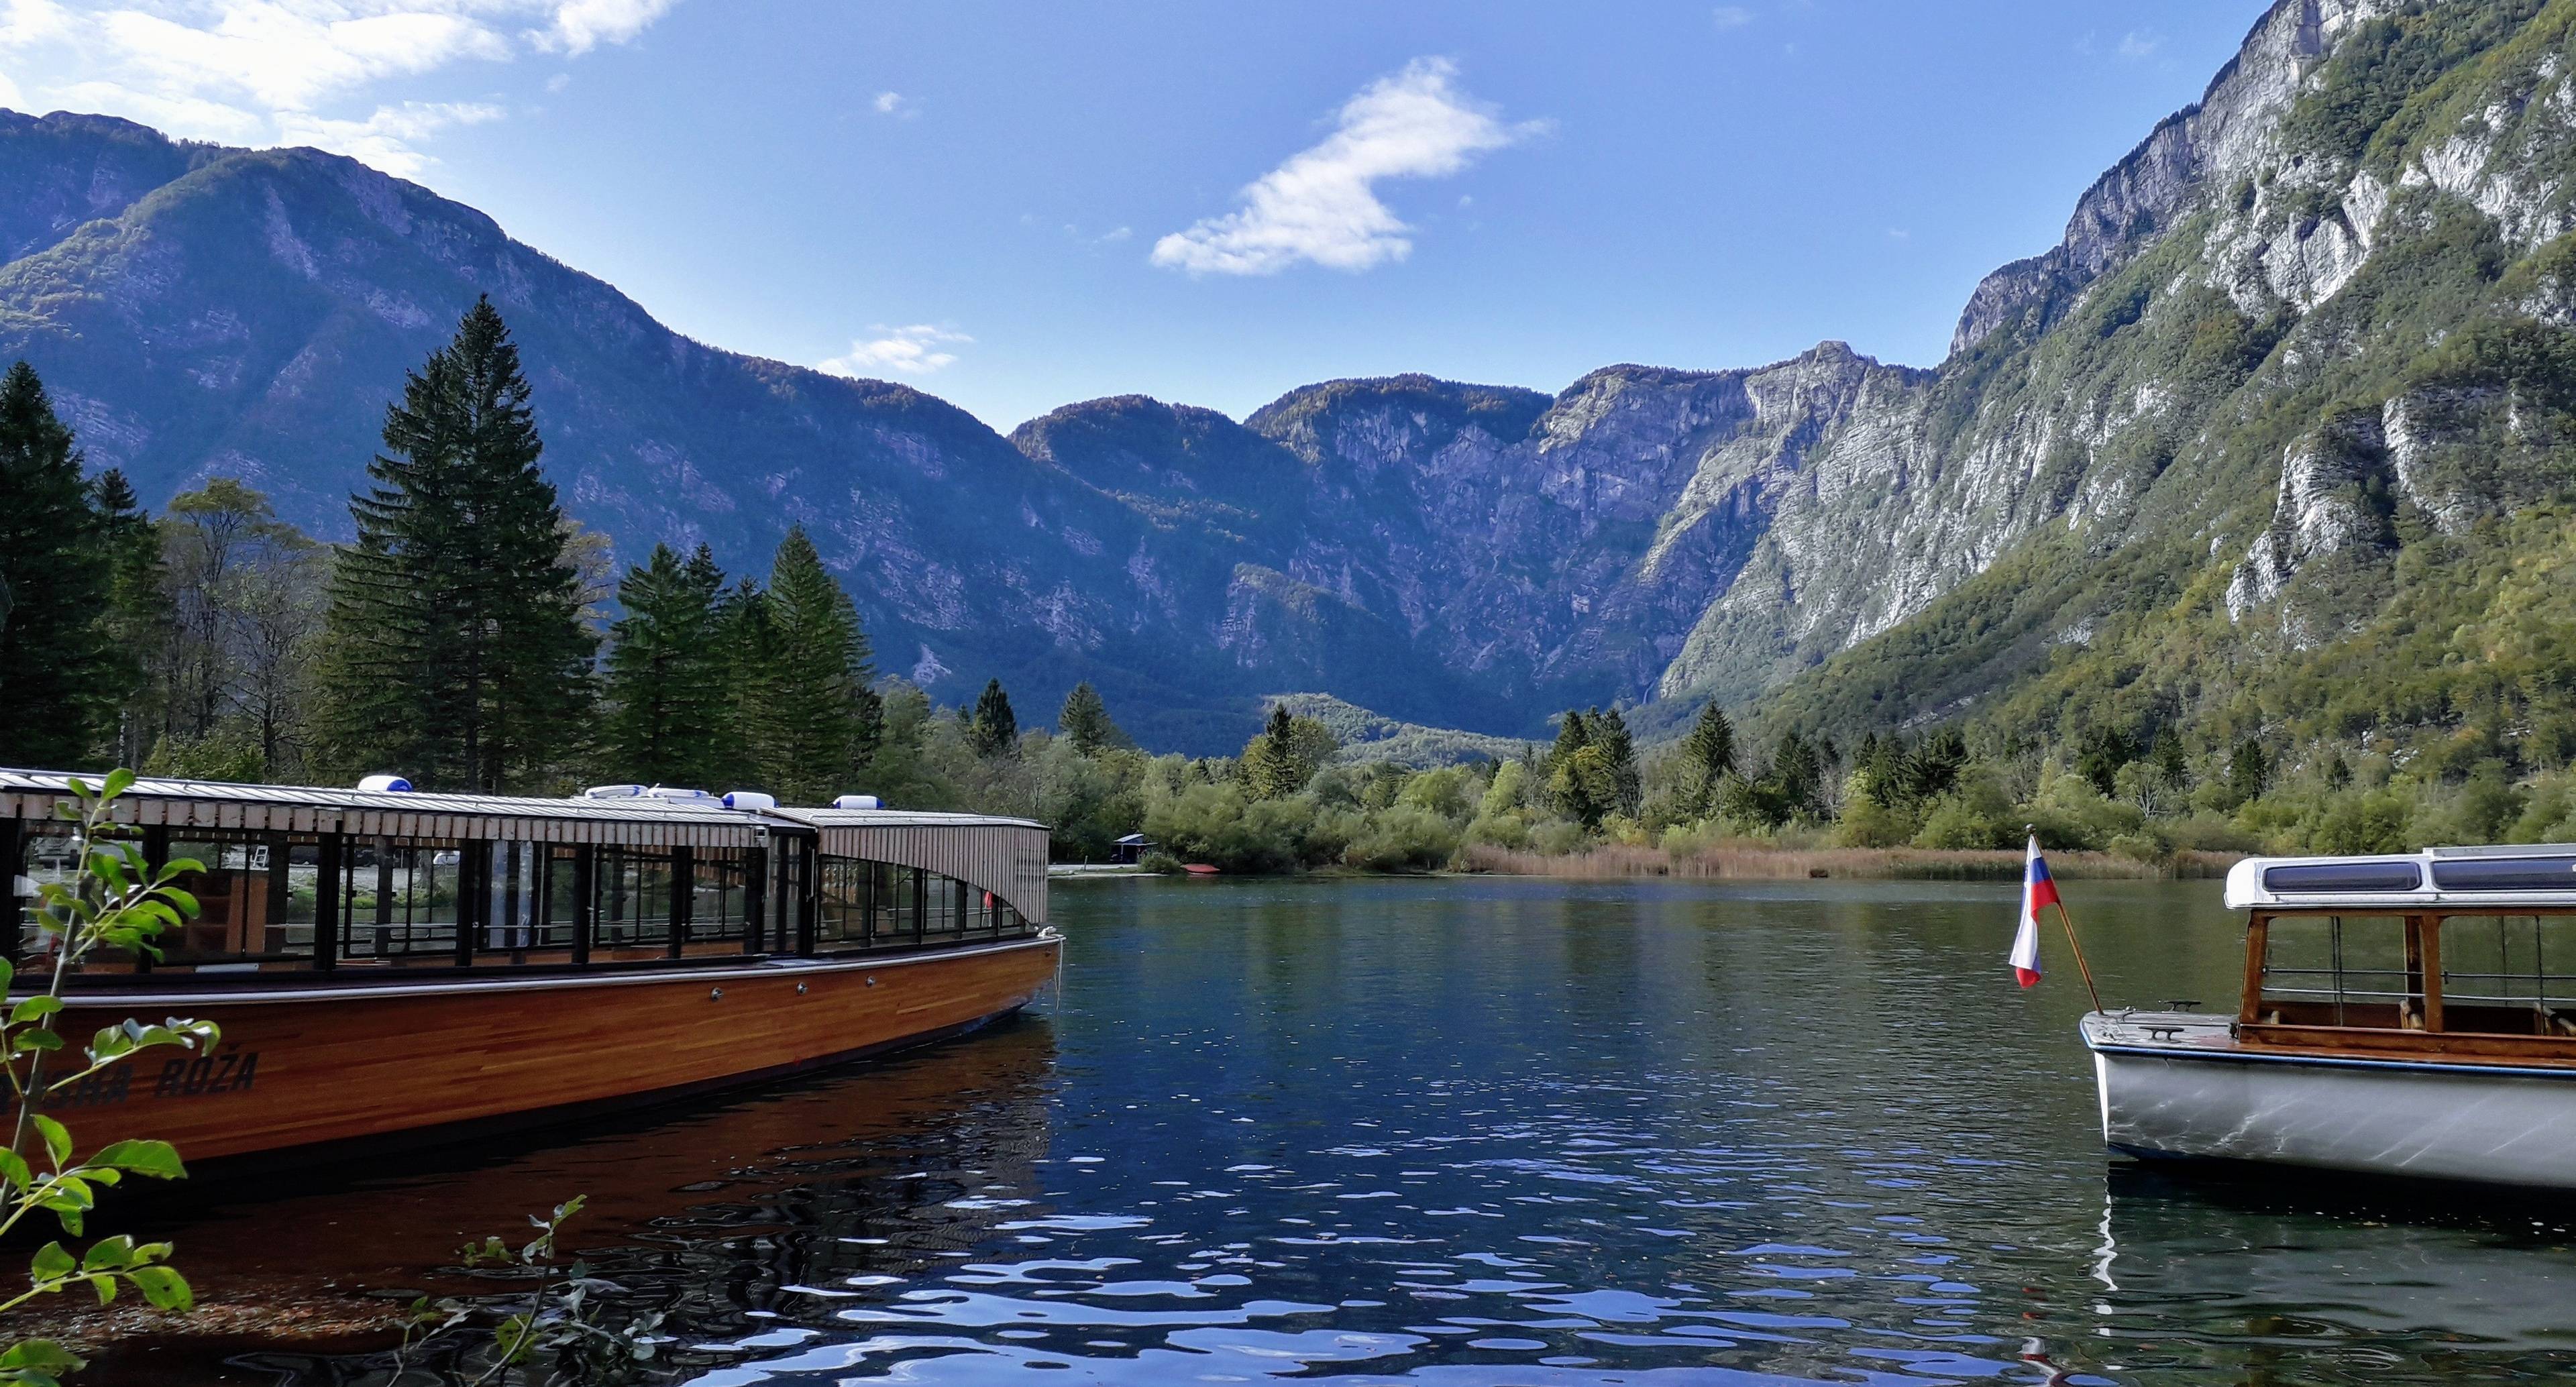 Lake Bohinj and Great Places to see in Triglav National Park